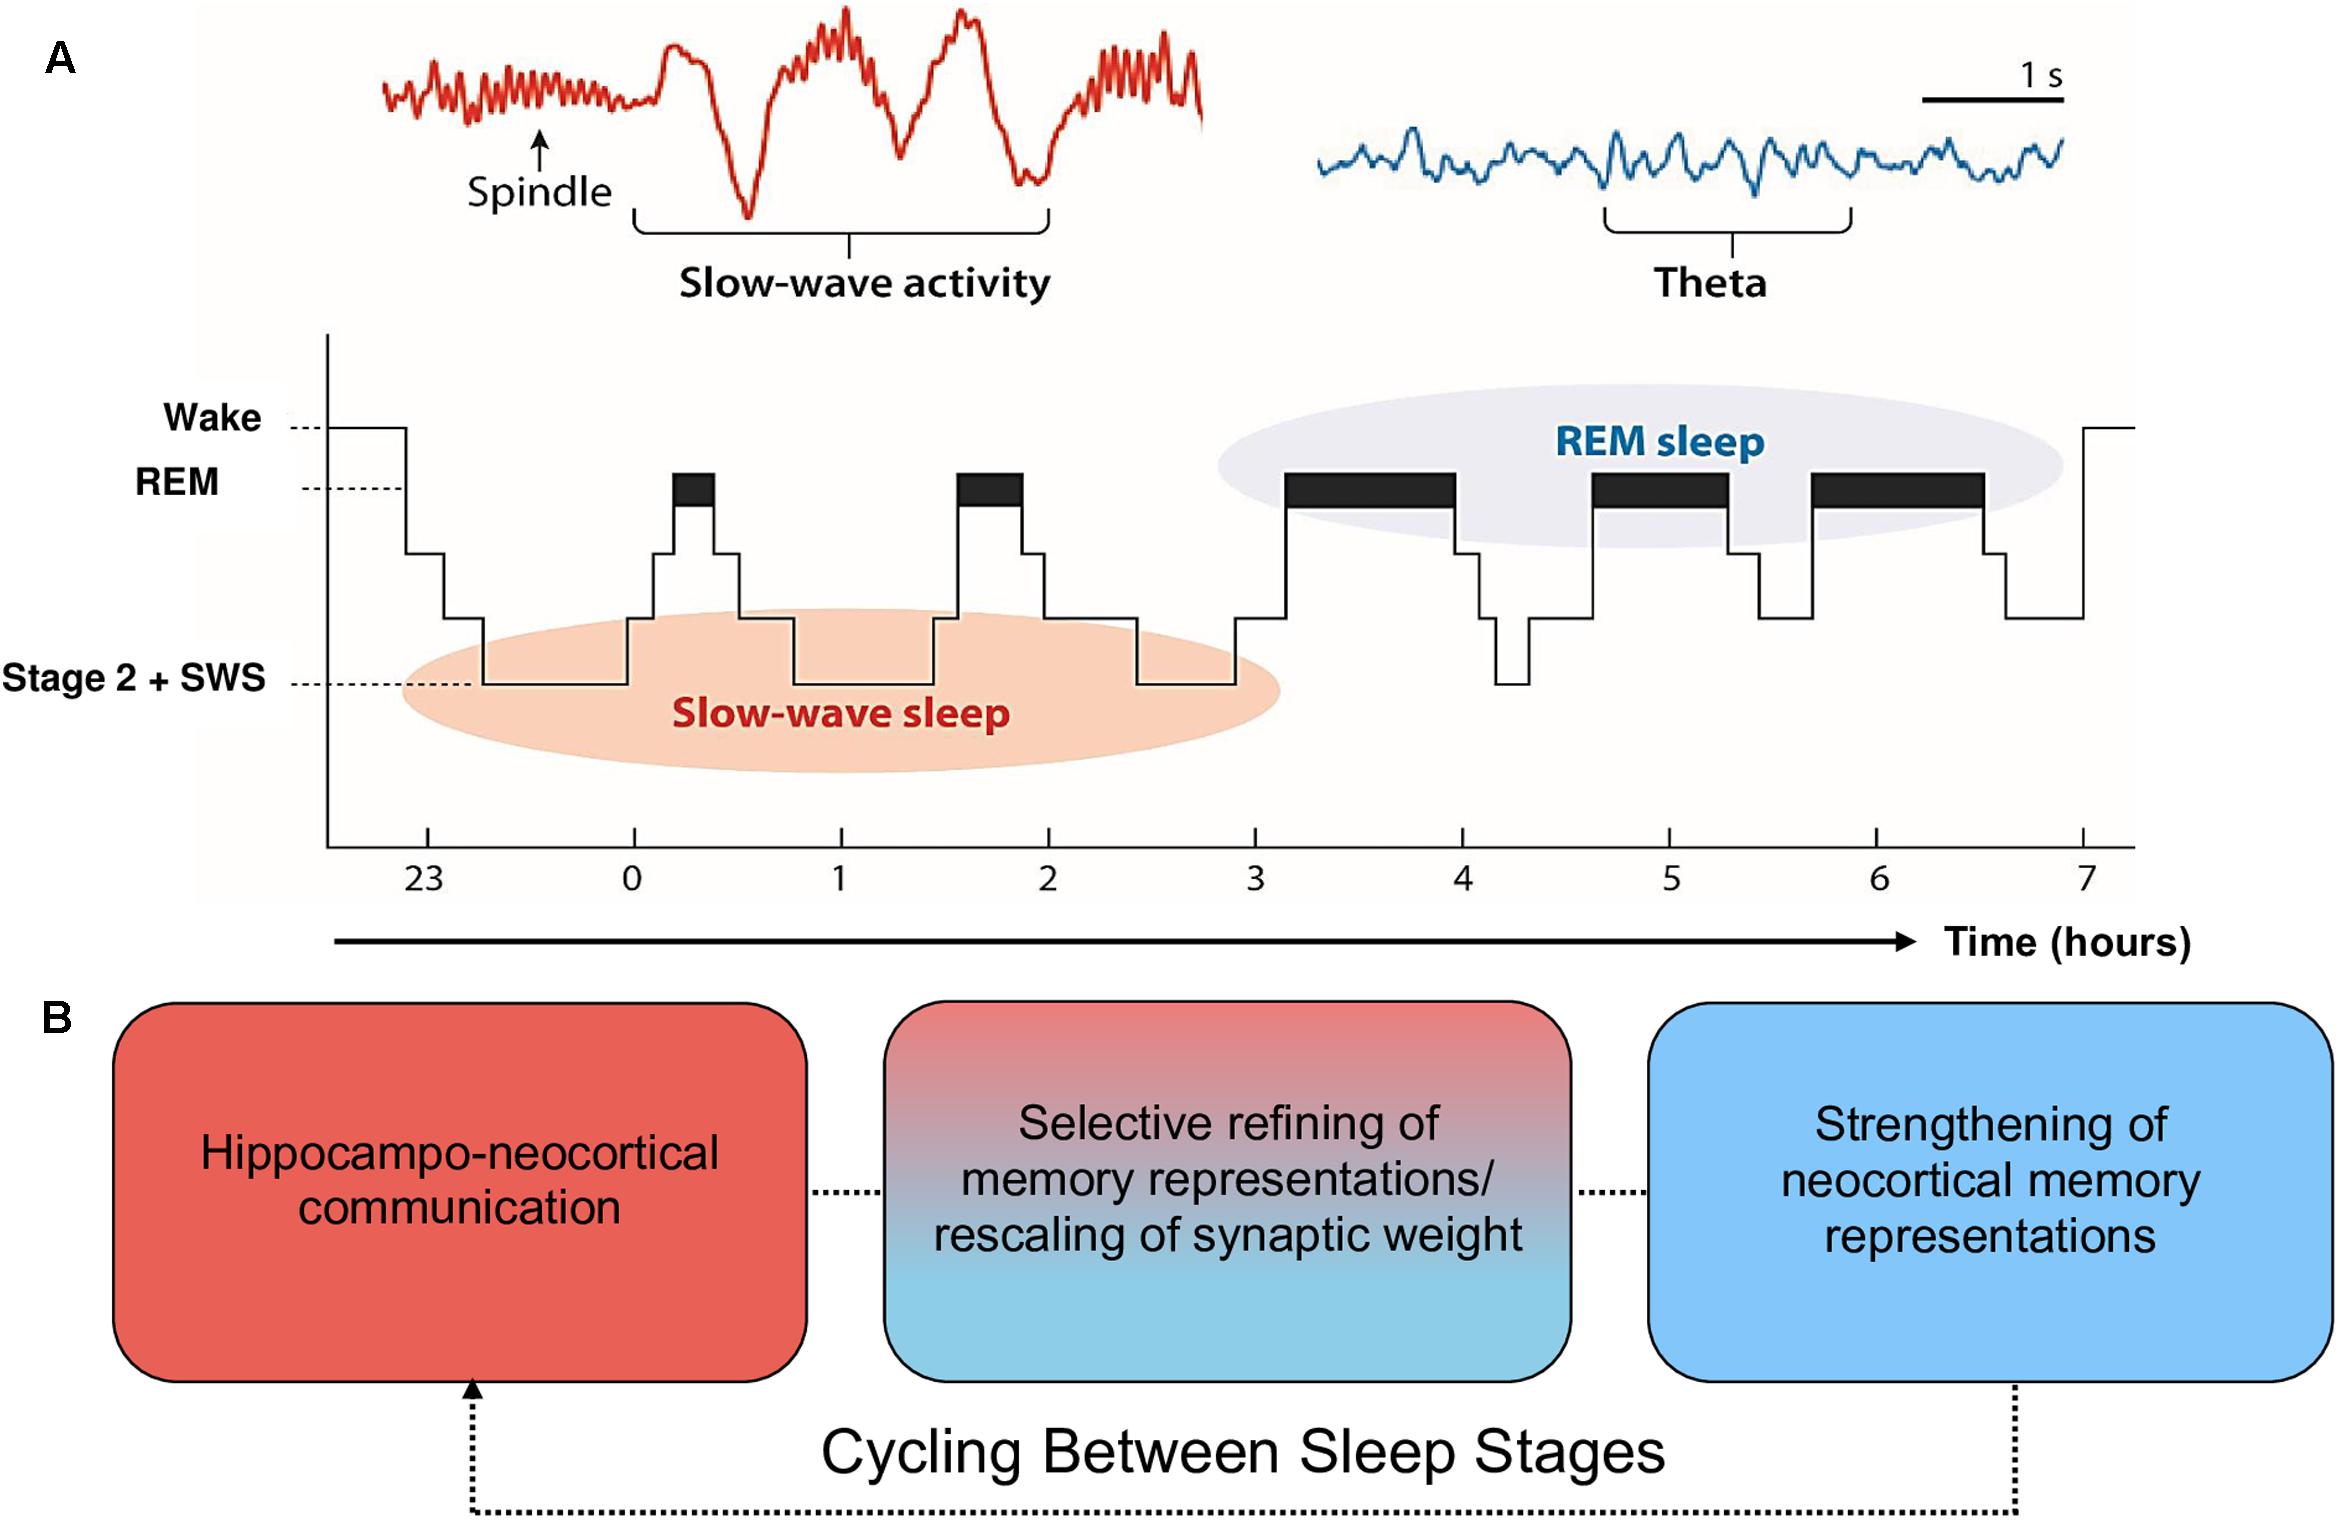 Does light sleep contribute to memory consolidation and learning?